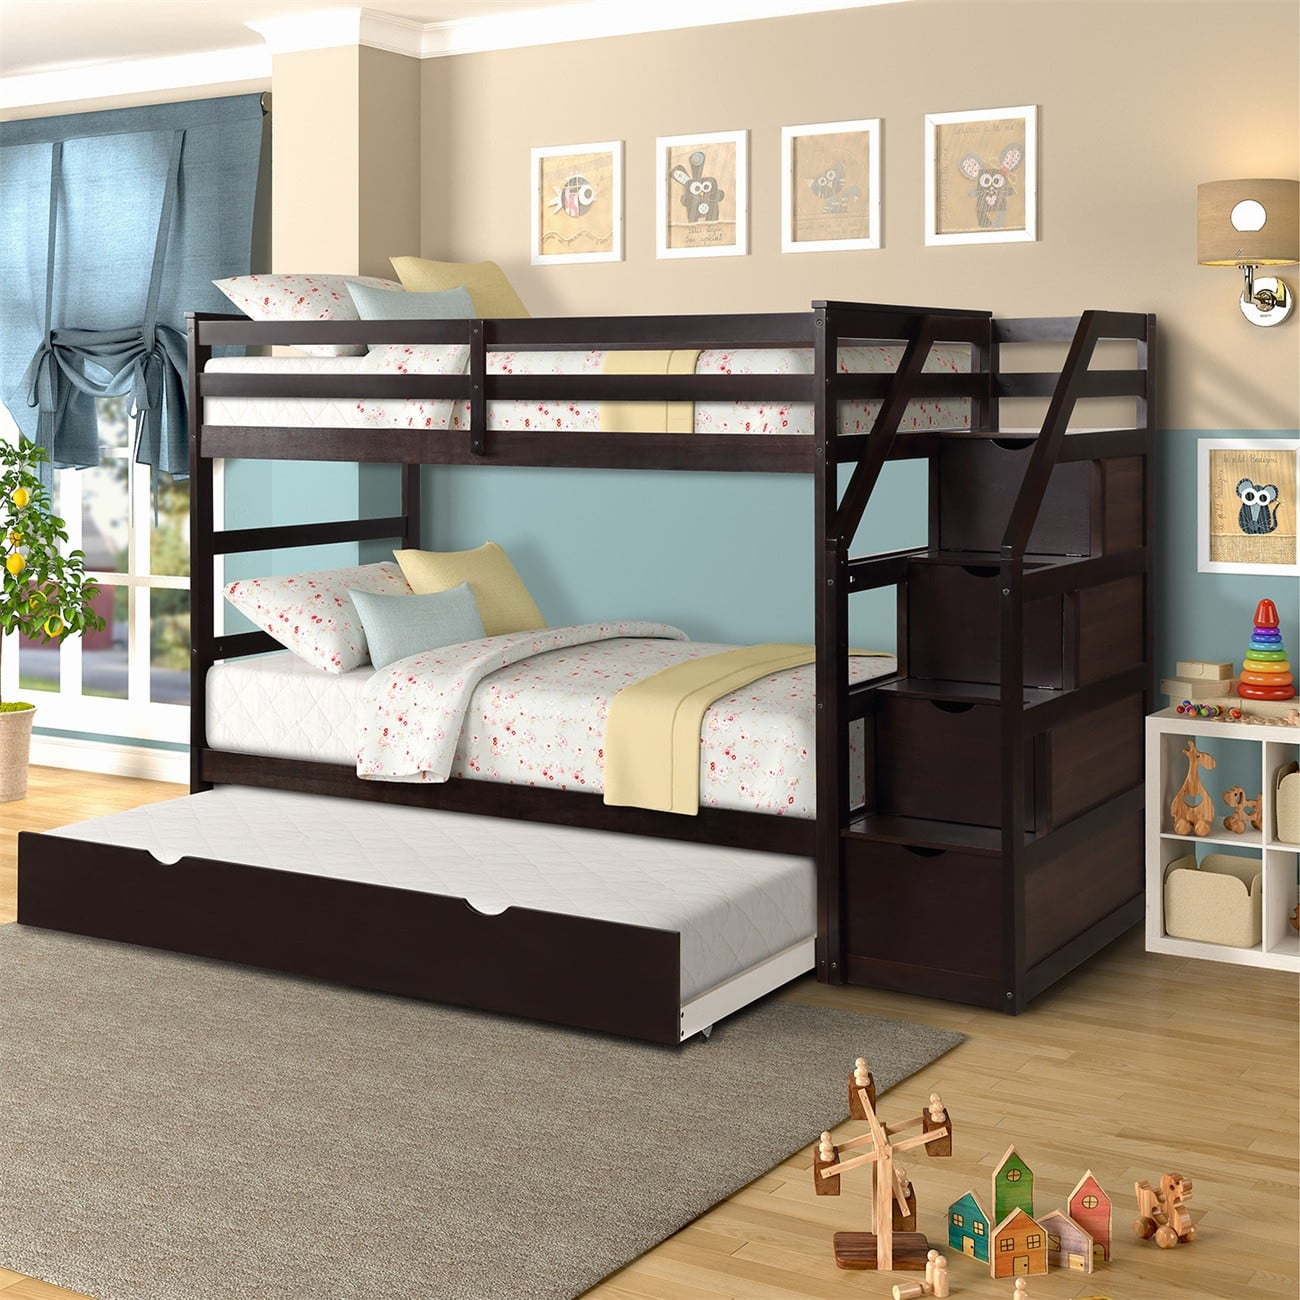 Modernluxe Twin Over Stair Bunk, Wooden Bunk Beds With Stairs And Drawers